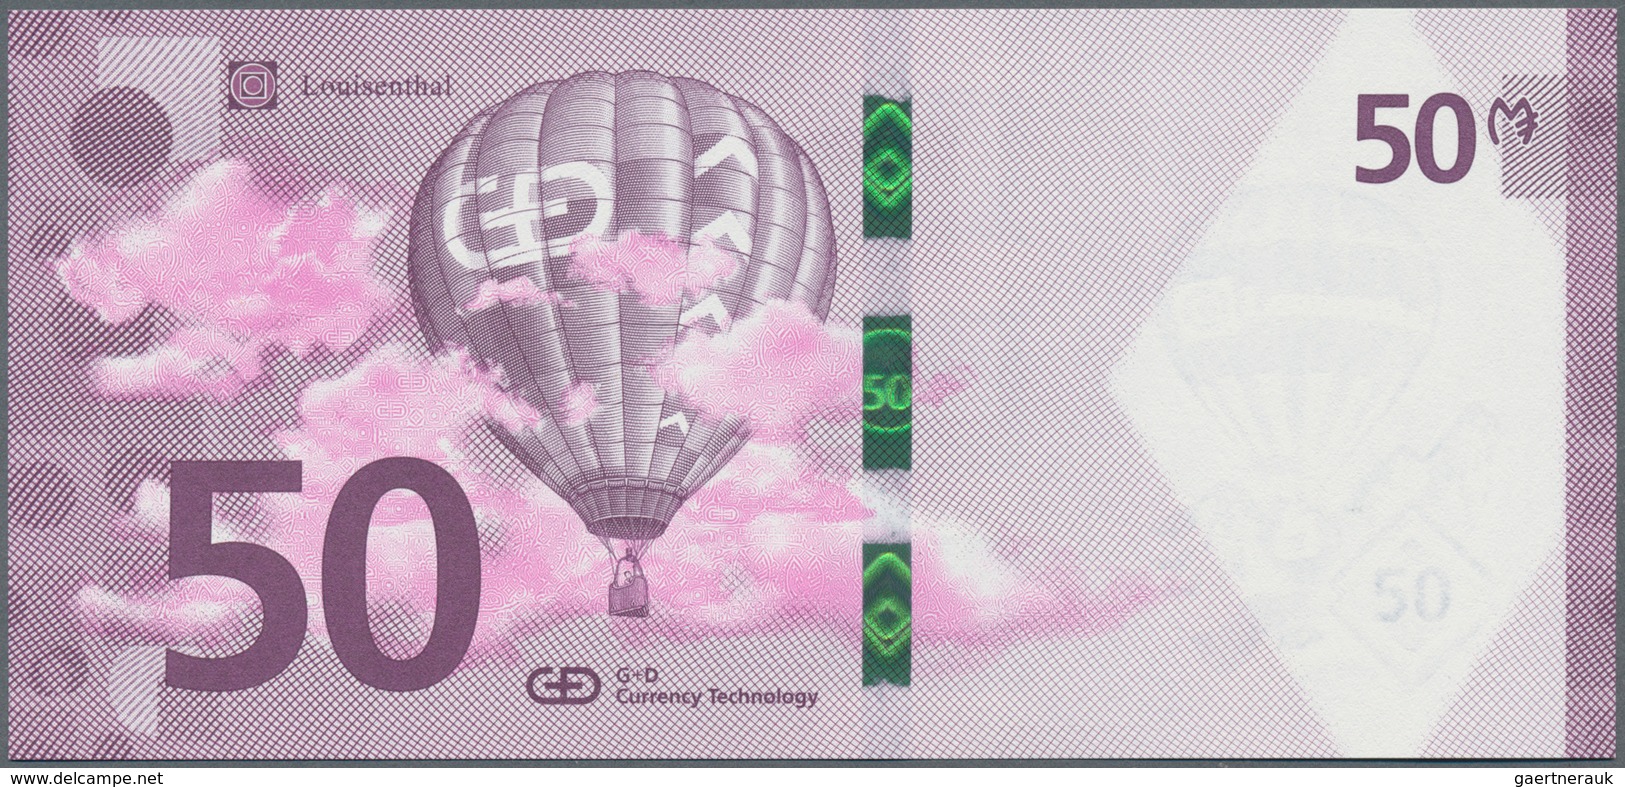 Testbanknoten: Uniface Test Note By Louisenthal “50 Balloon” With Wide Segmented Security Thread. Co - Specimen